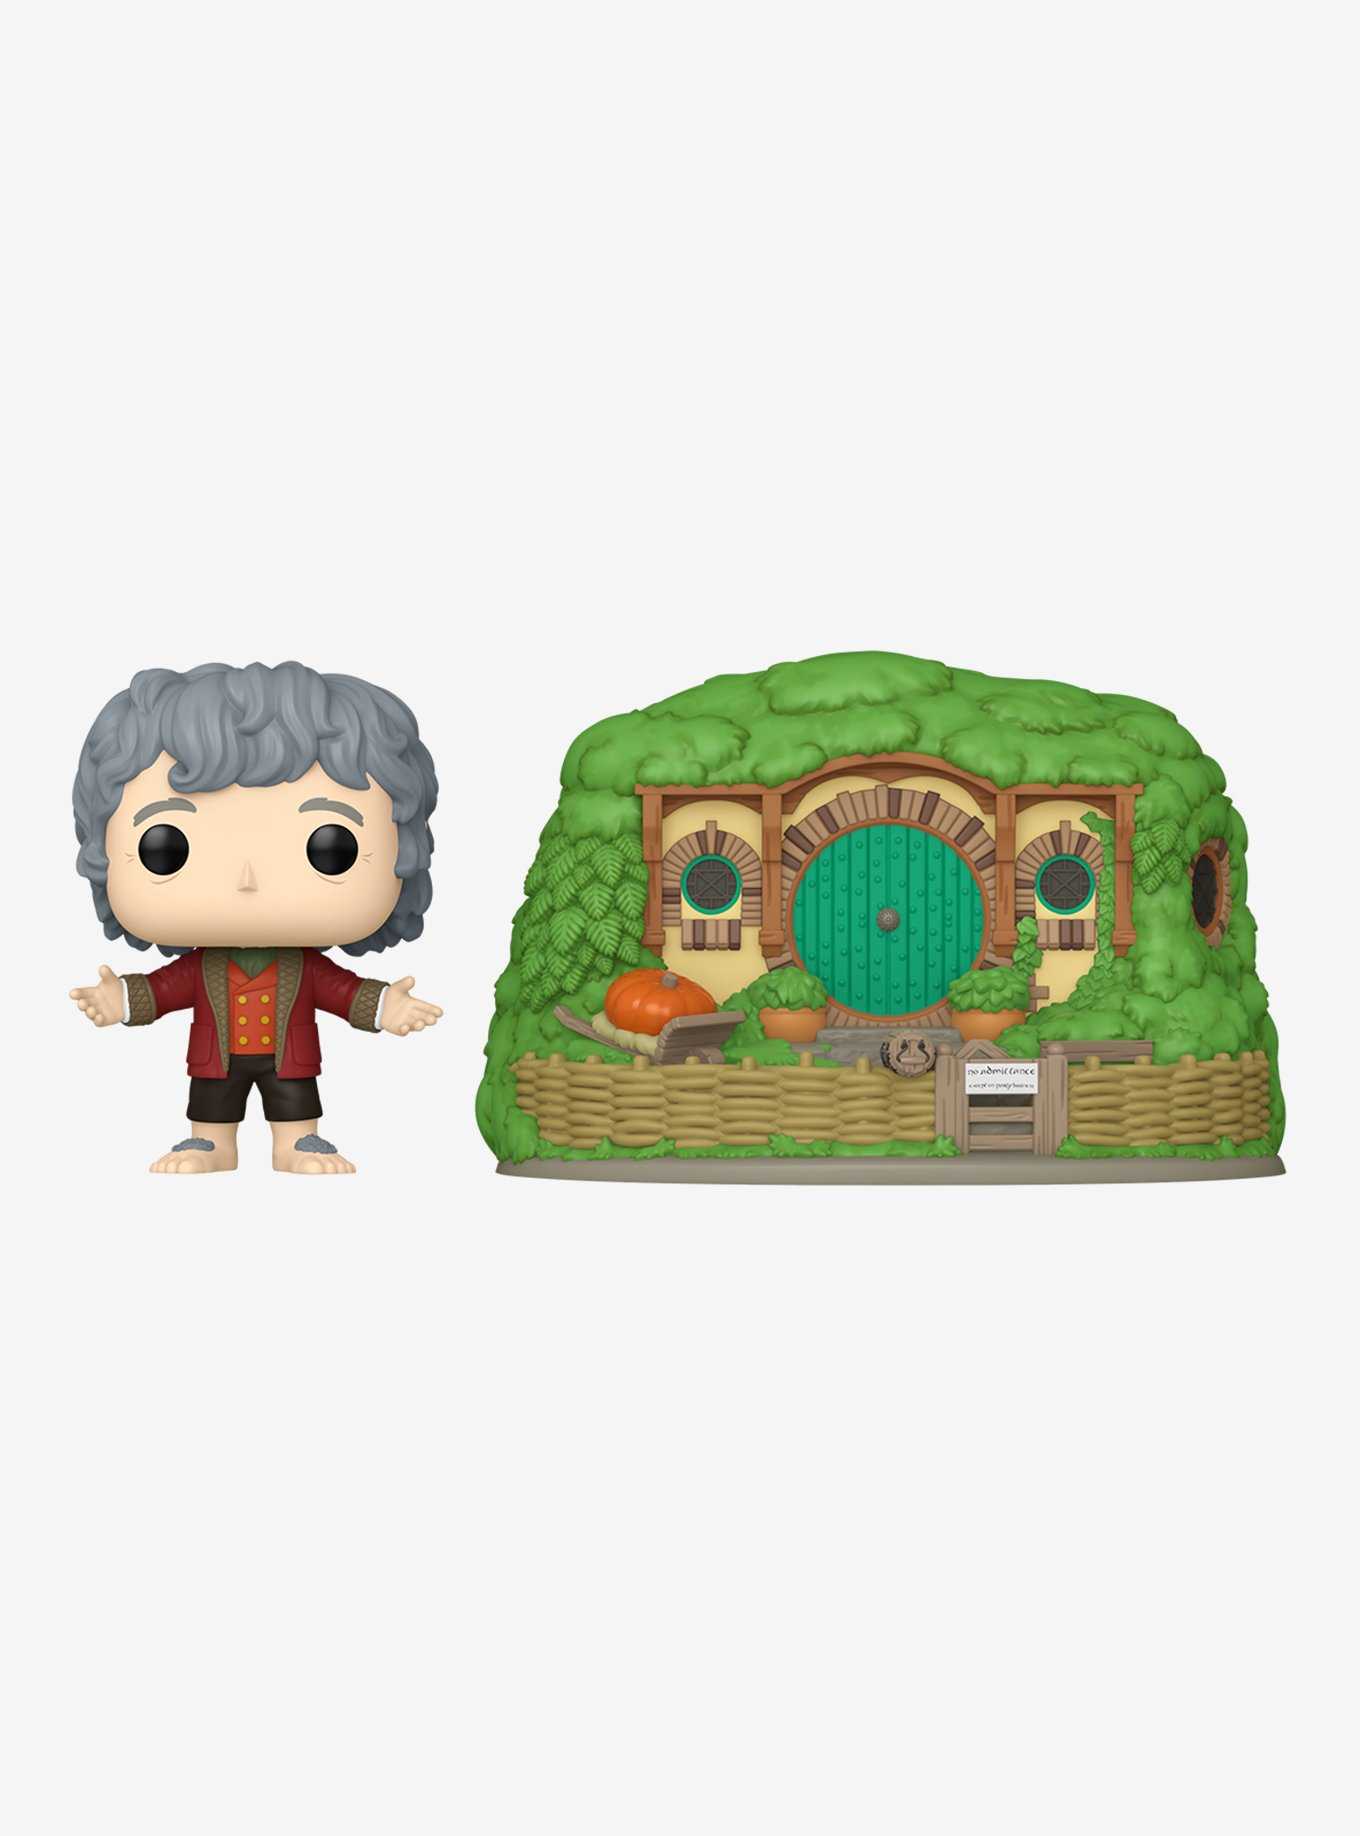 Funko Pop! Town The Lord of the Rings Bilbo Baggins with Bag-End Vinyl Figure, , hi-res